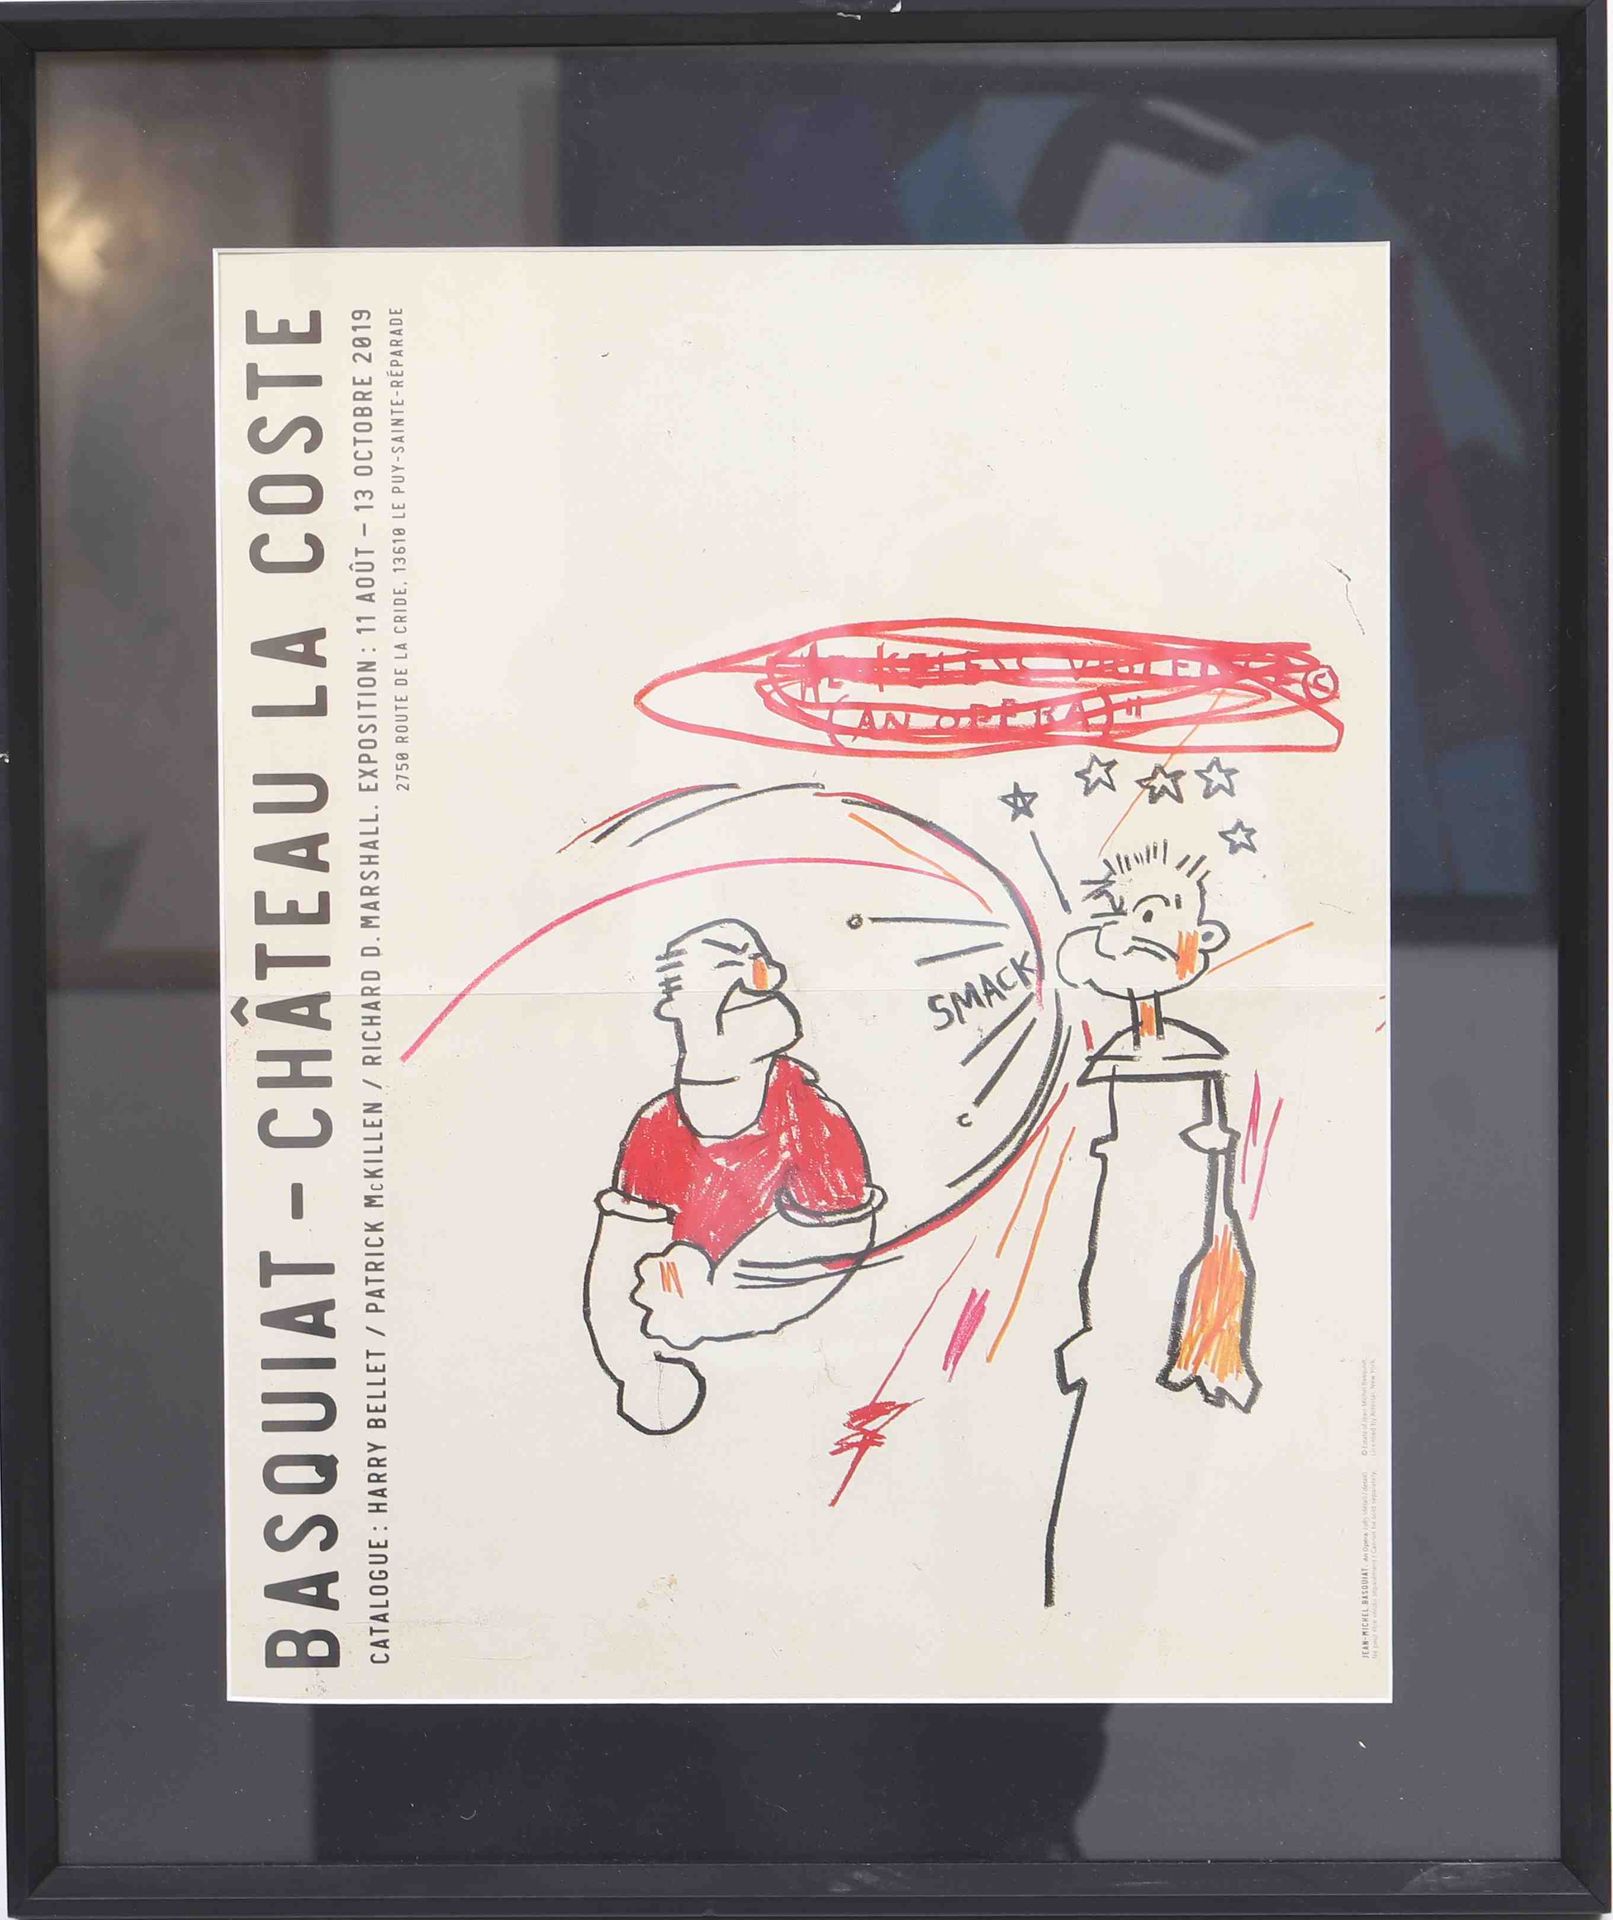 Null Jean-Michel Basquiat (1960-1988) (after)
Original poster for the exhibition&hellip;